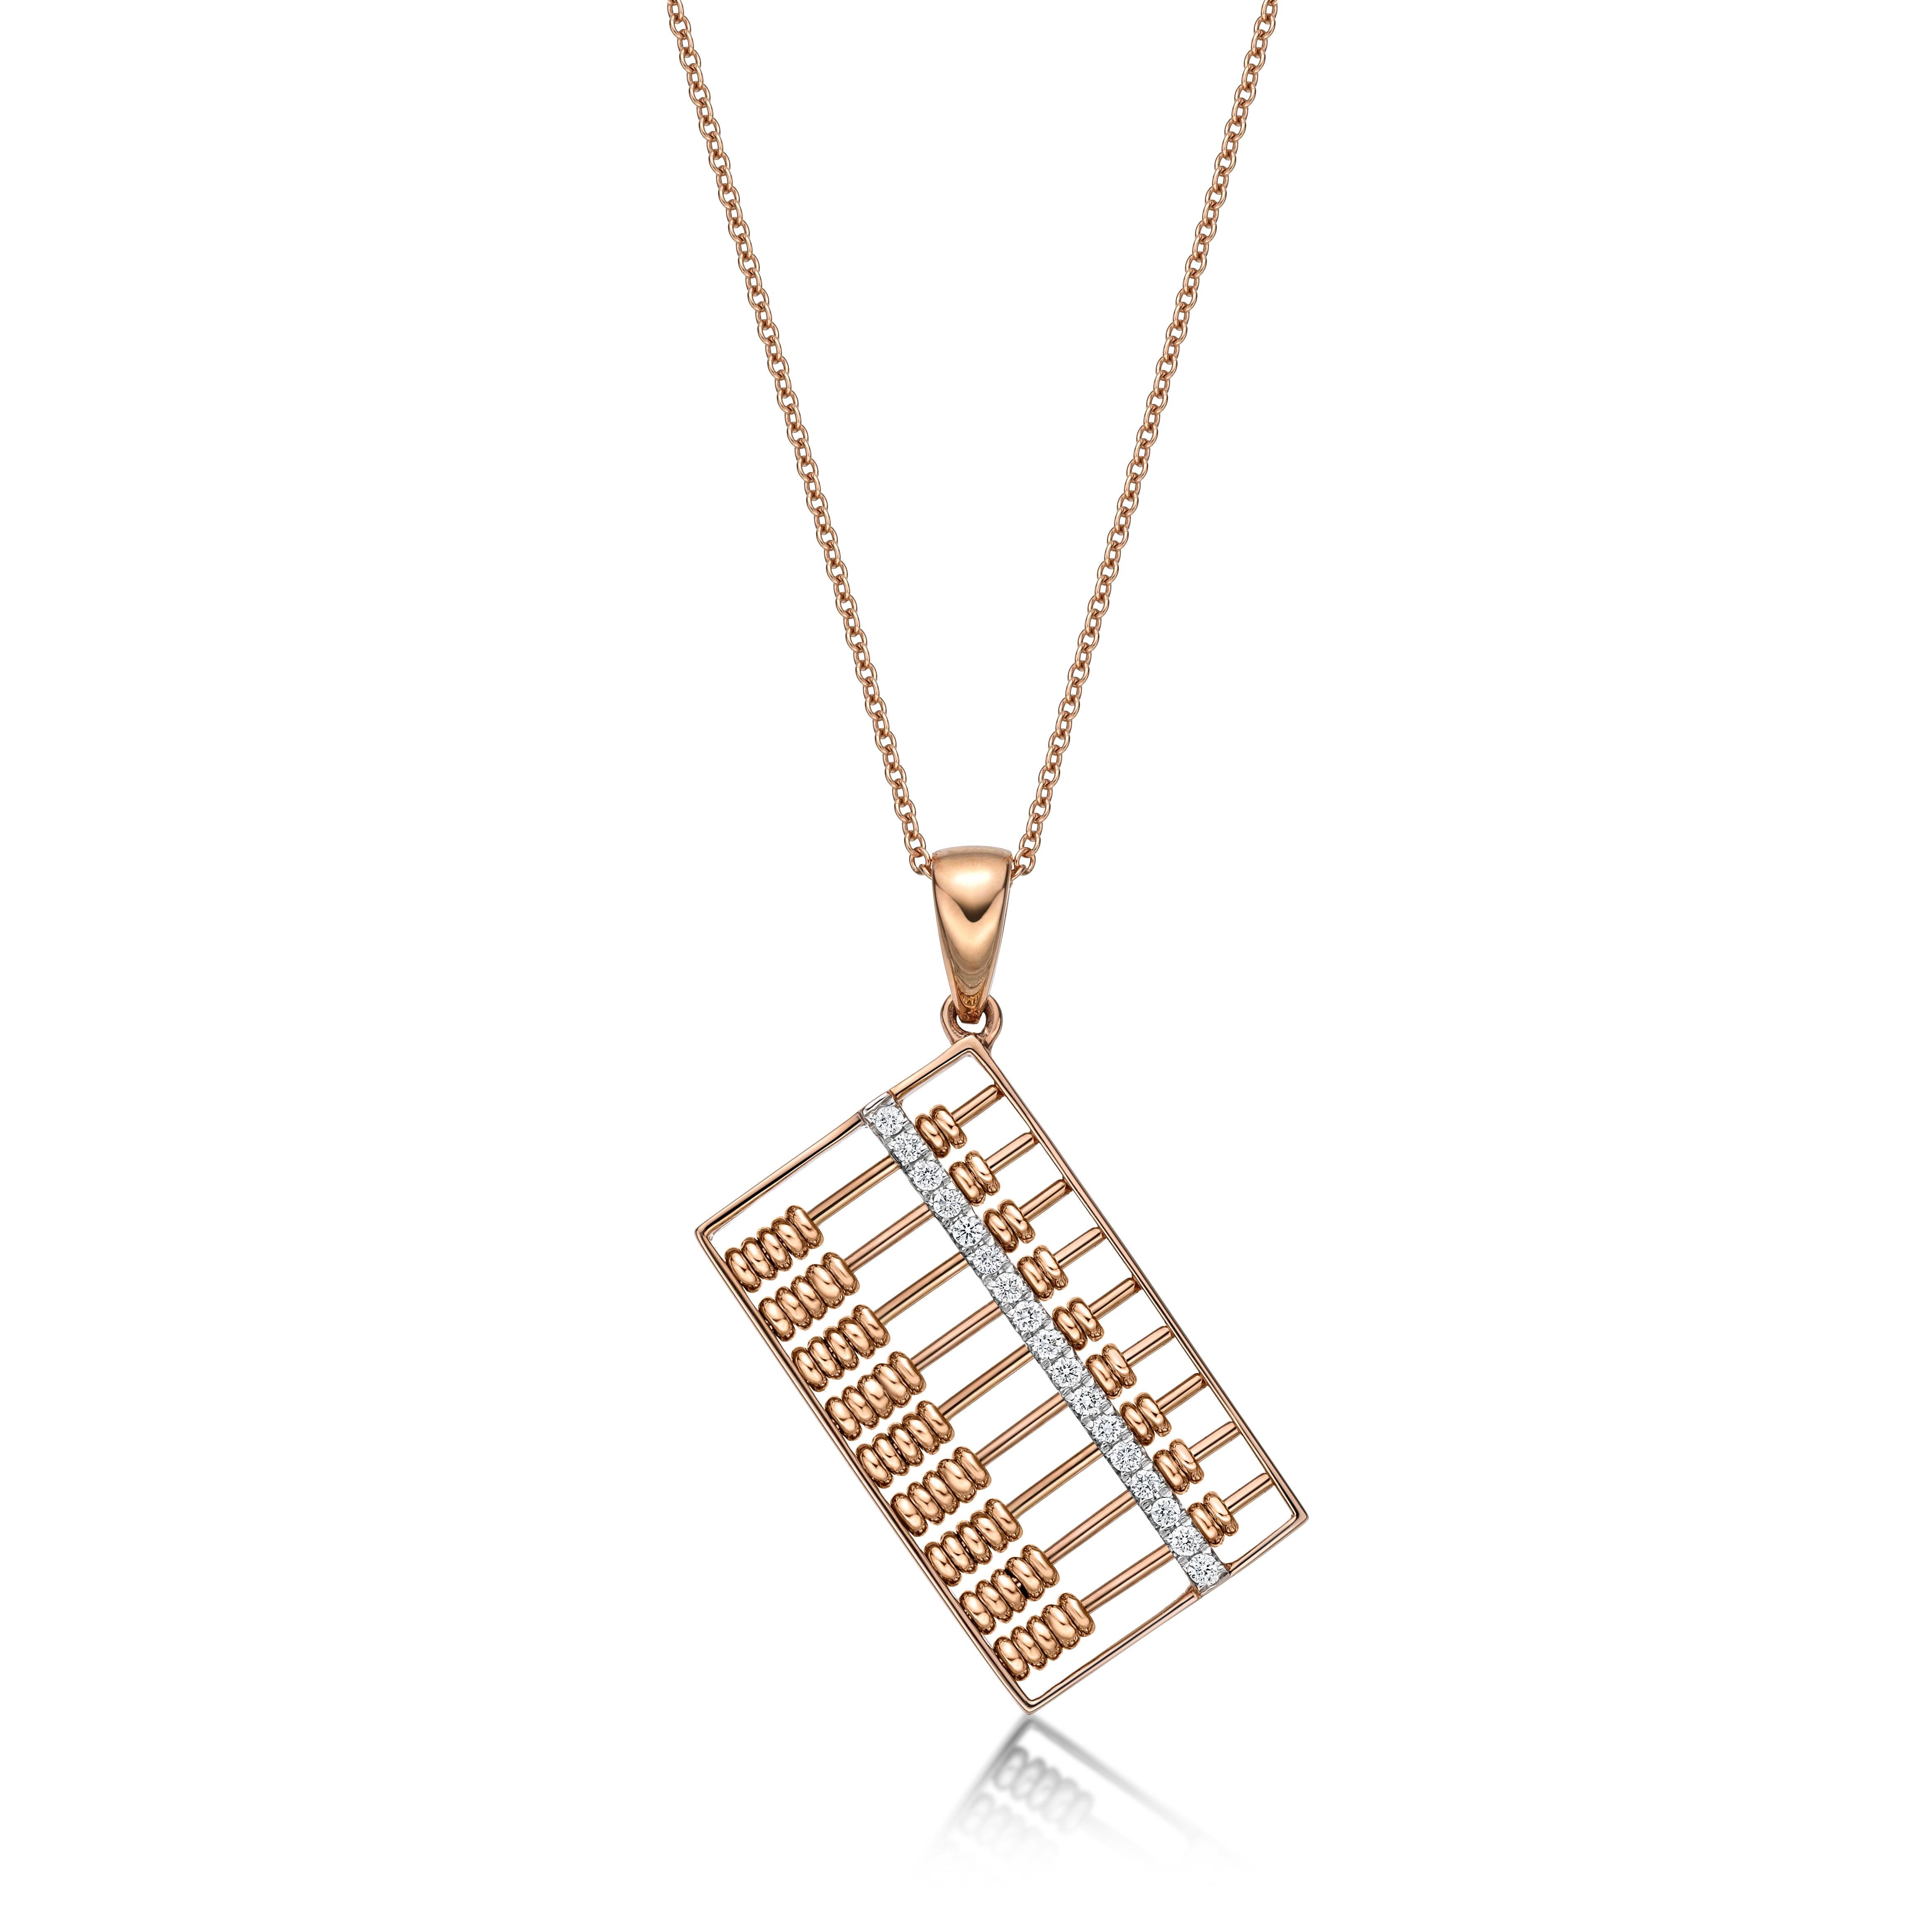 Abacus pendant with moving beads, set with diamonds  surround frame weighing 0.09 carats, mounted in 18 Karat rose gold.
Abacus, invented in ancient China  more than 2,600 years ago, is a traditional computing tool for businesses and widely used in